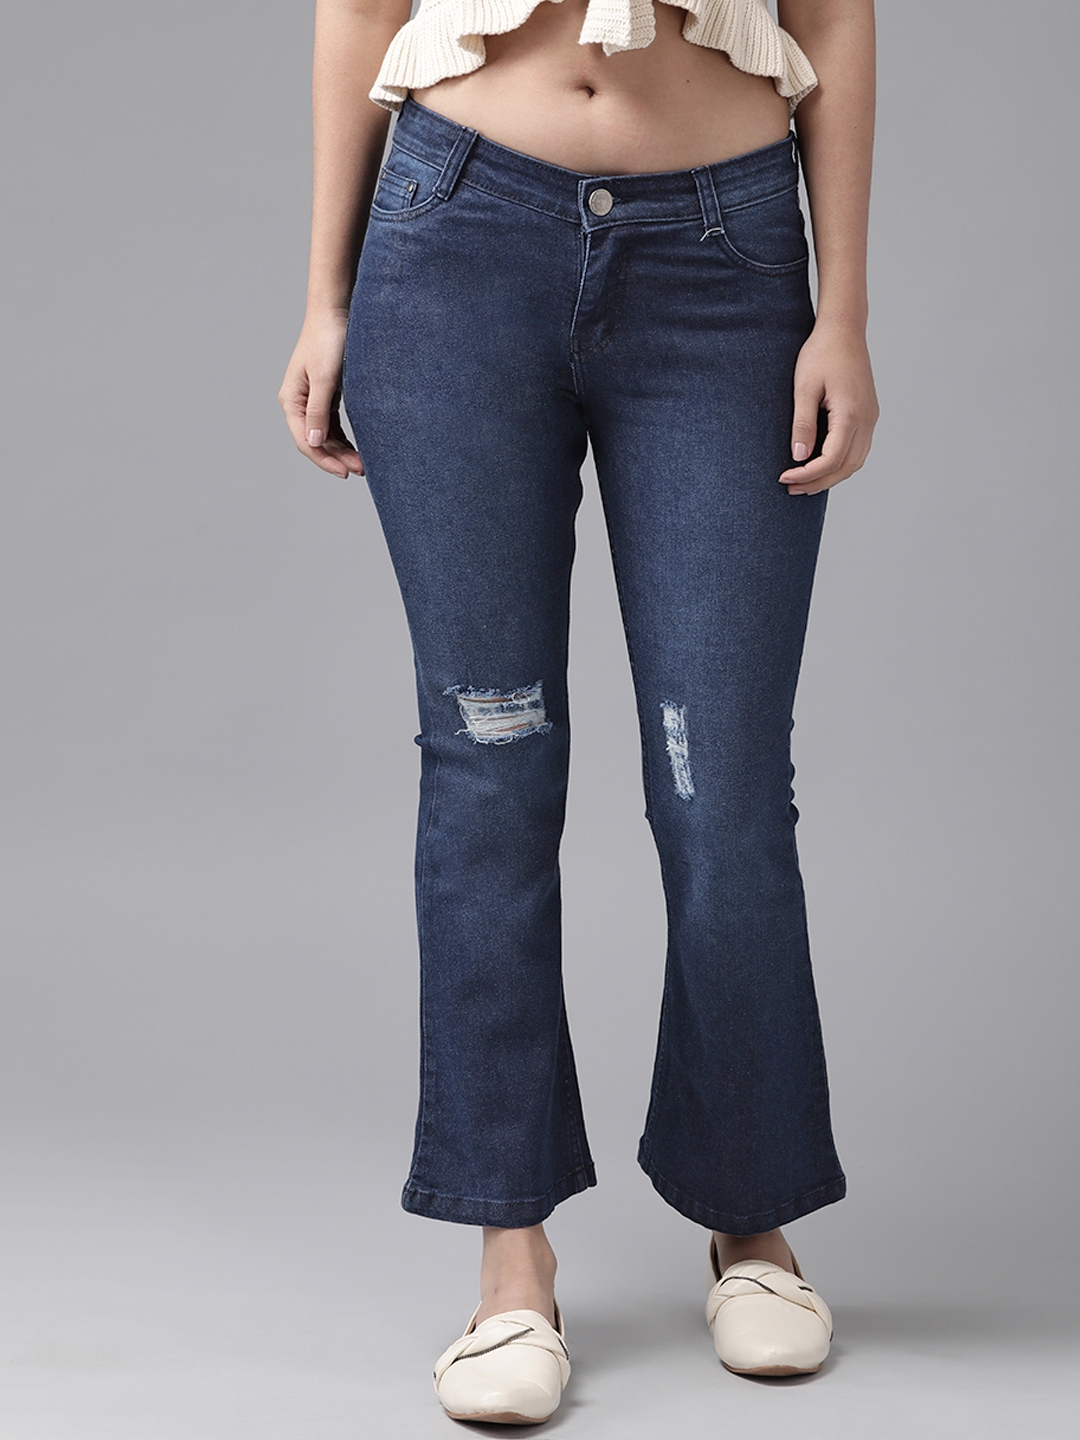 Shop for Bootcut Jeans Pants for Women Starting @ ₹999